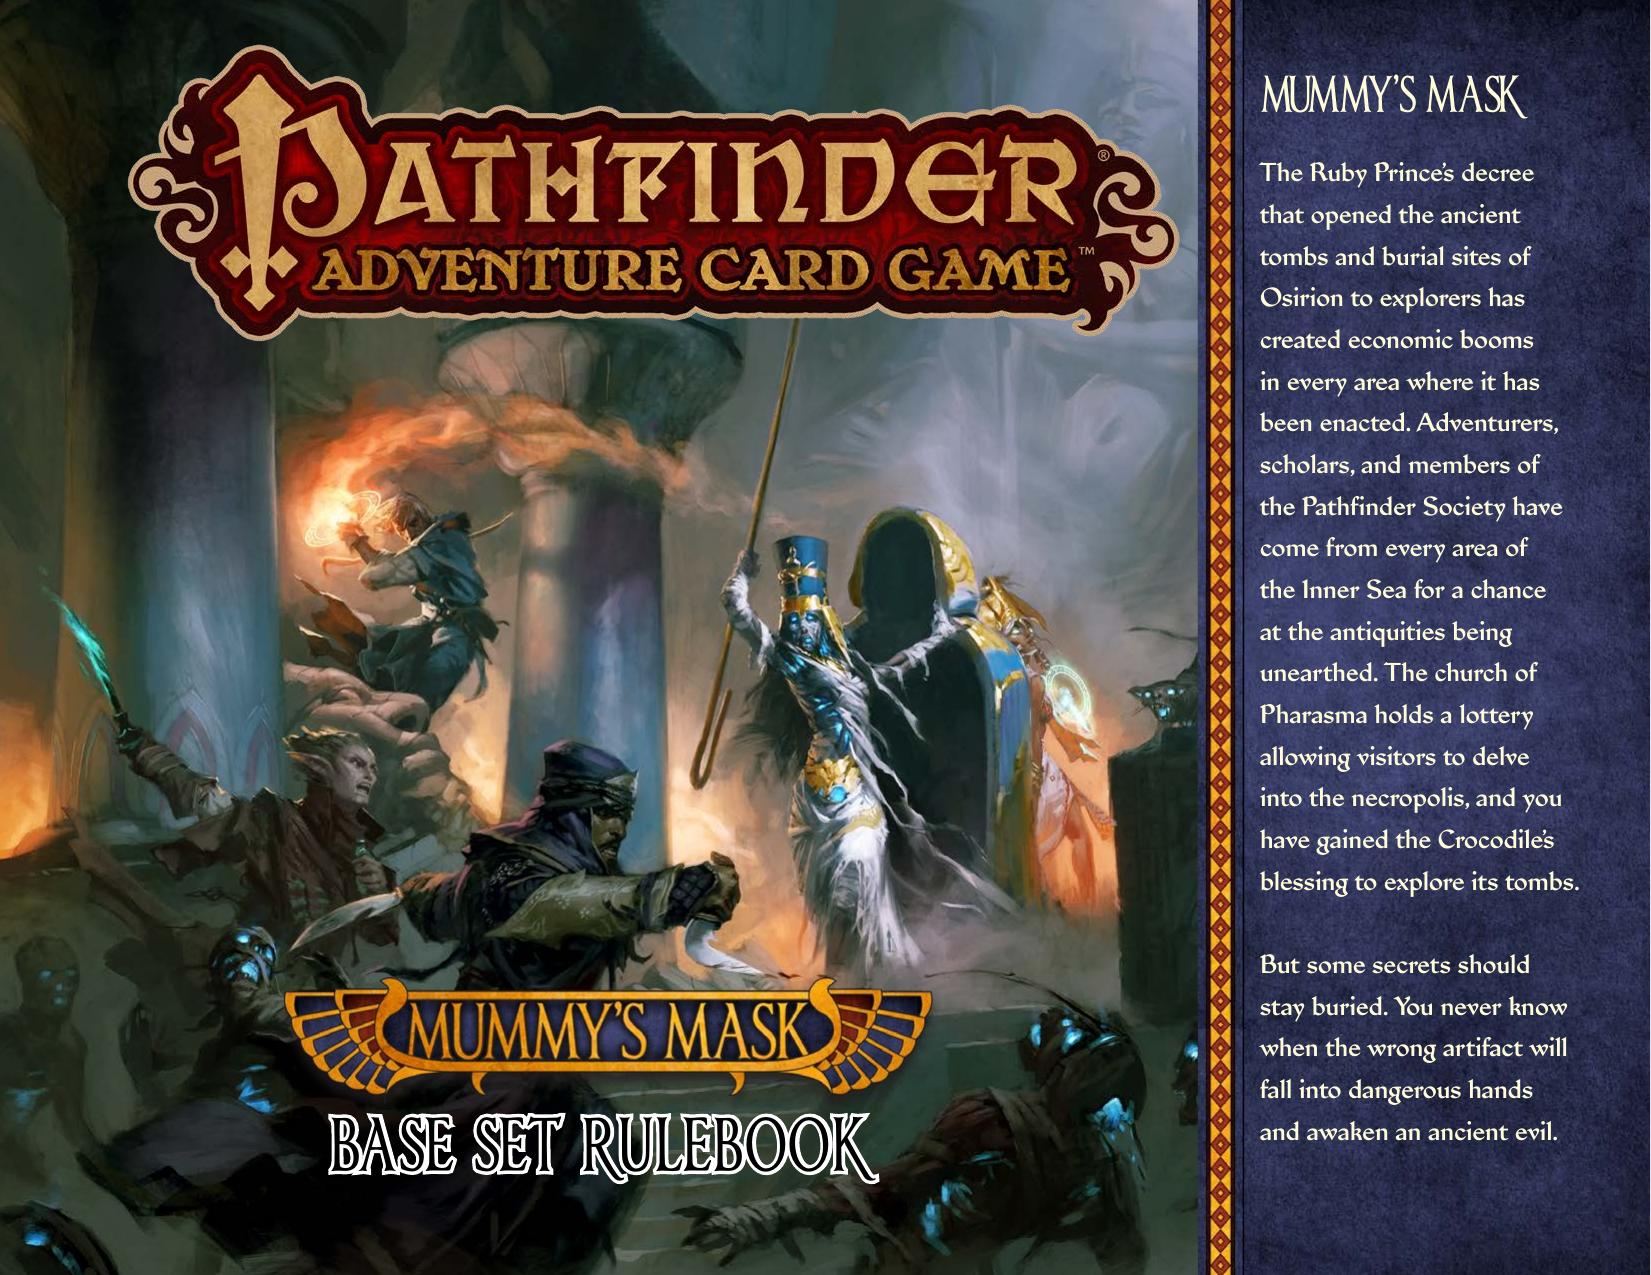 Adventure Card Game Adventure 3-0 Basic Set Rulebook by Unknown